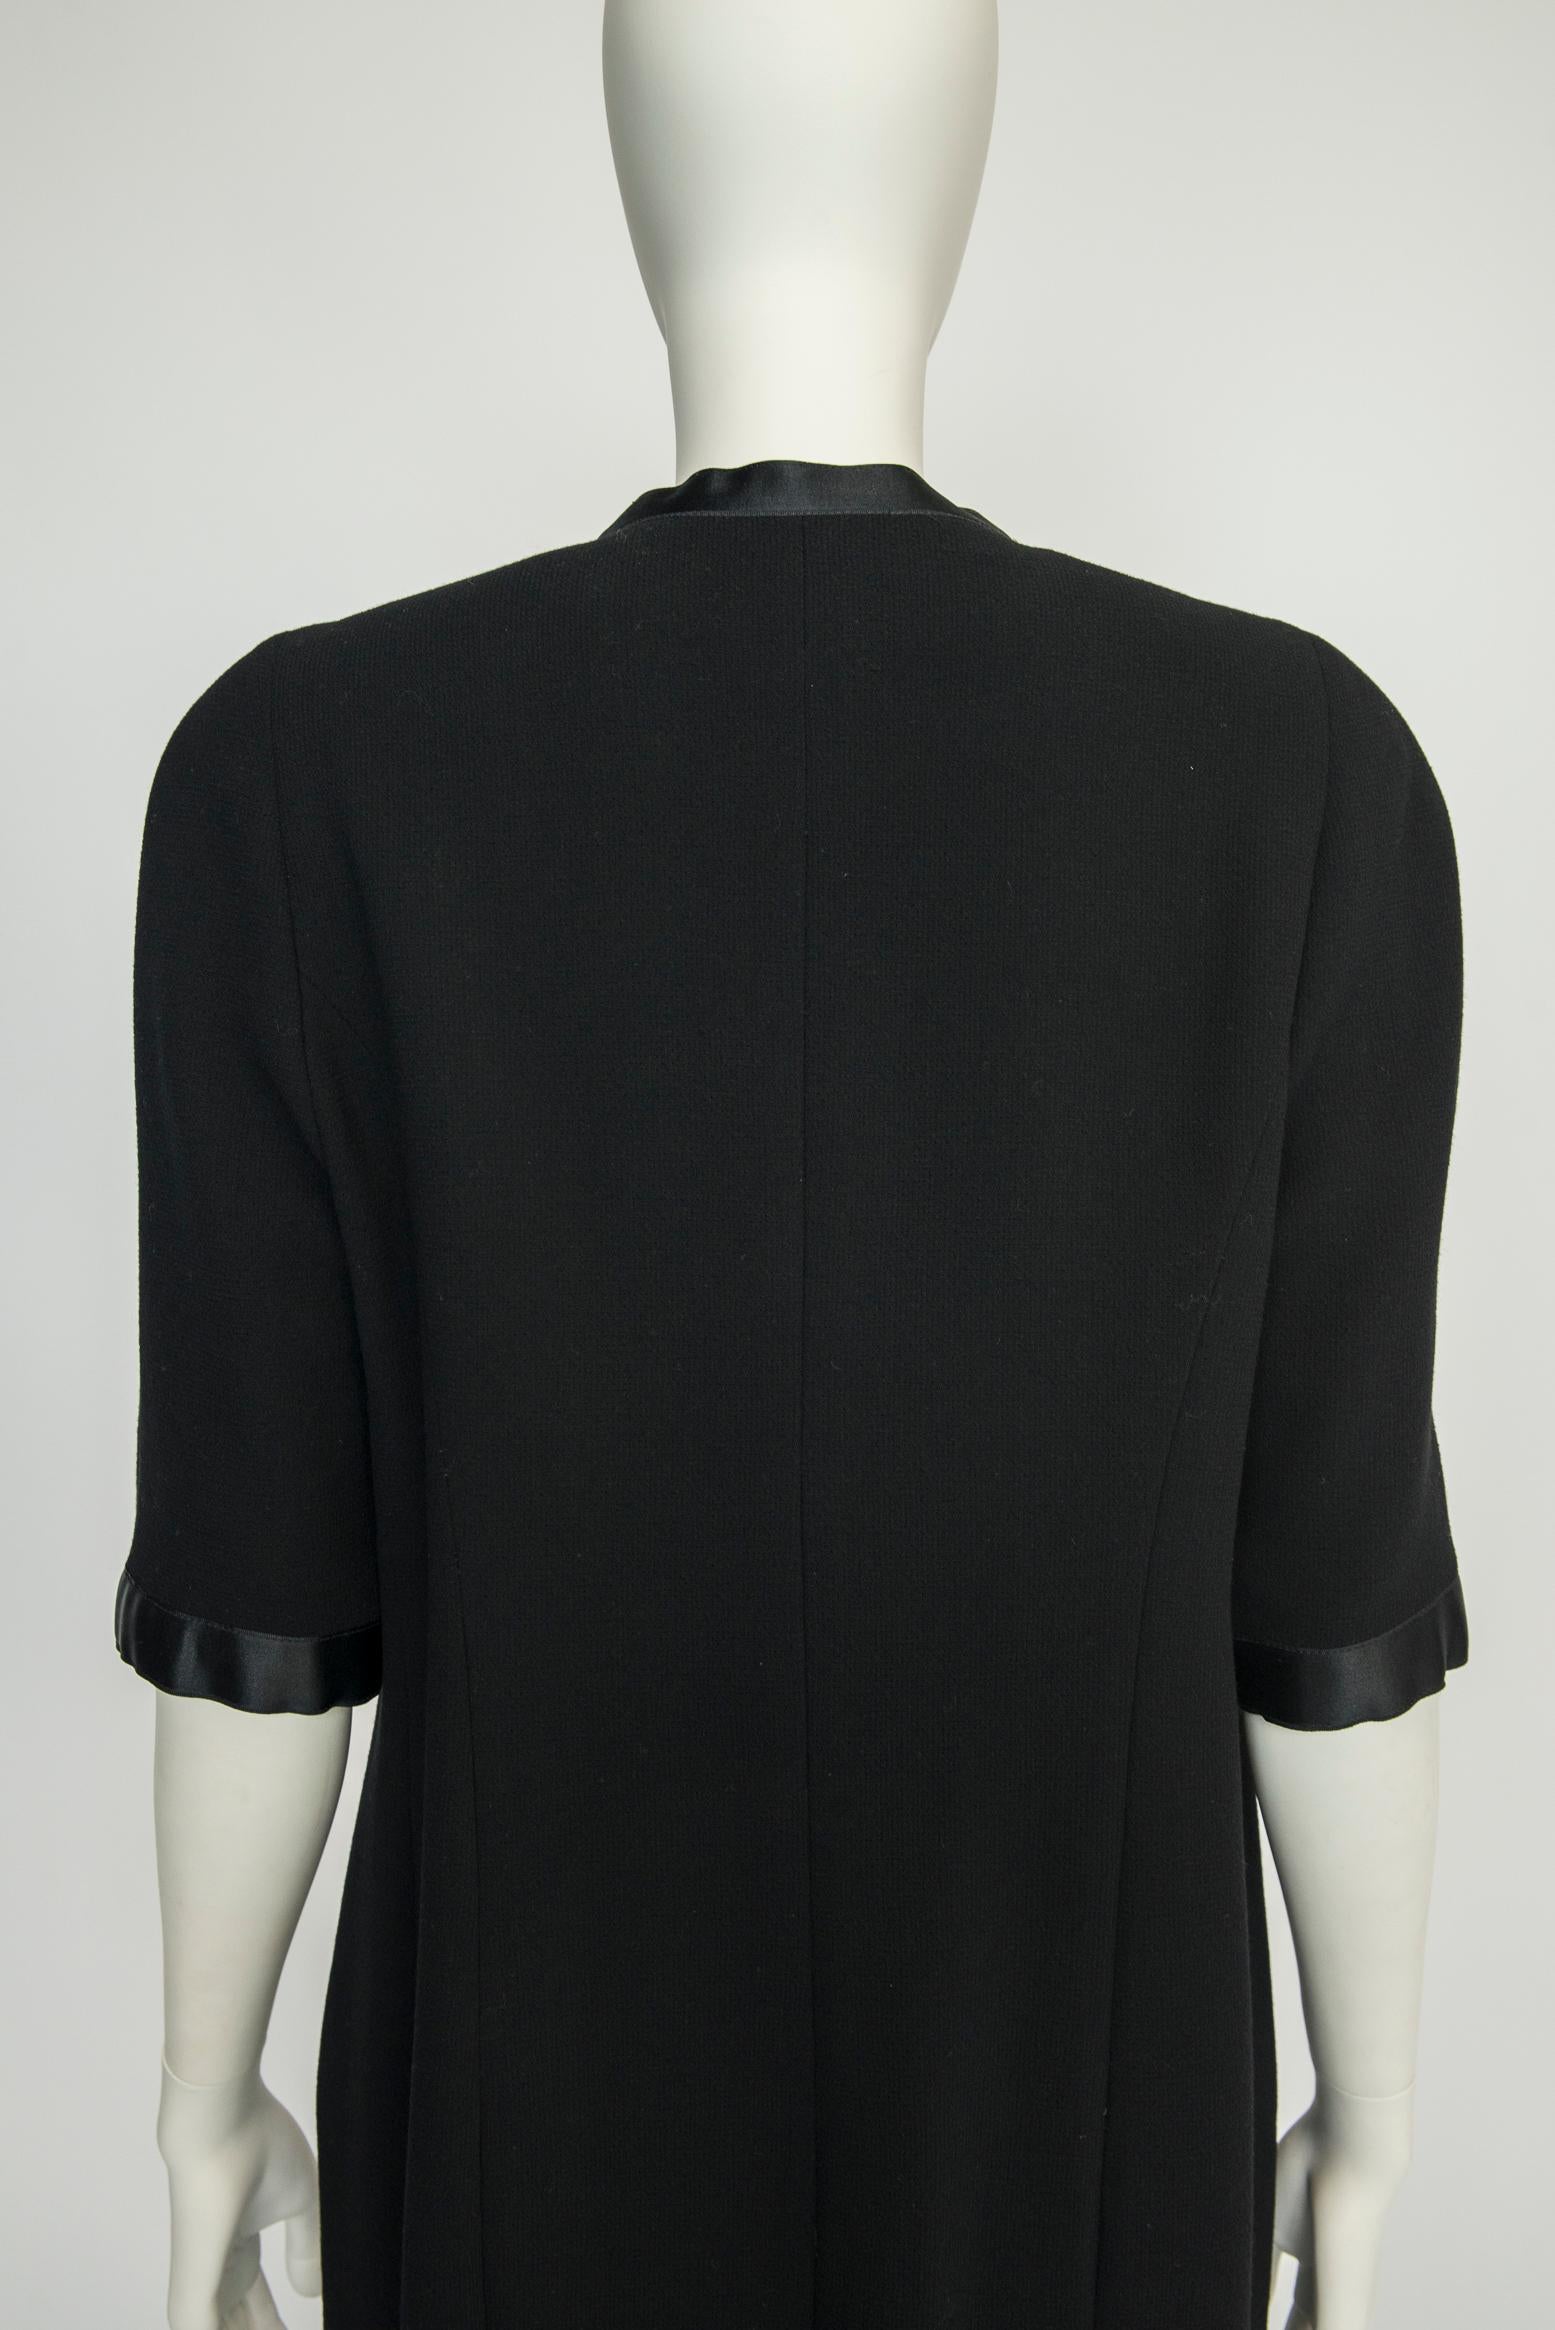 Chanel By Karl Lagerfeld Button-Embellished Little Black Dress, FW 1990-1991 For Sale 4